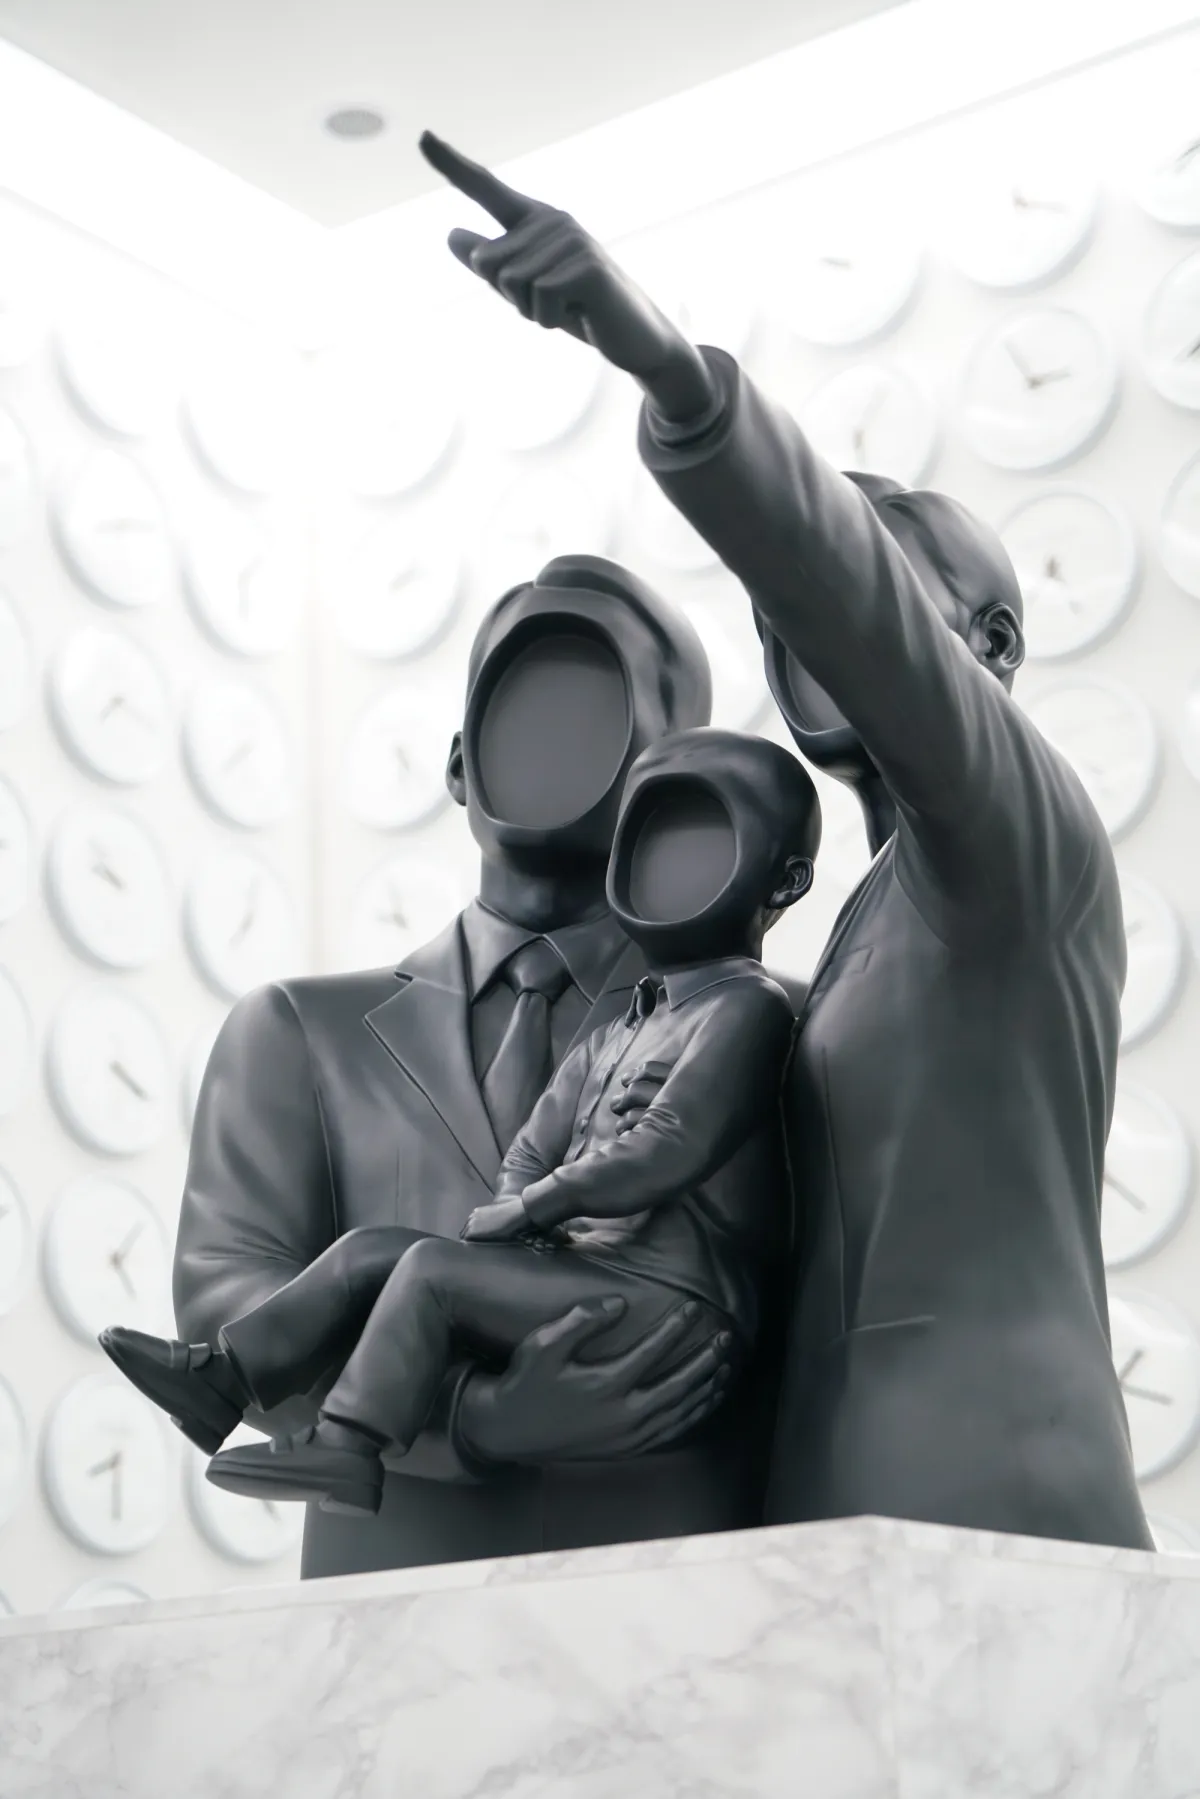 A minimalist black sculpture depicting a faceless family with two adults and a child stands against a white wall filled with clocks showing various time zones.